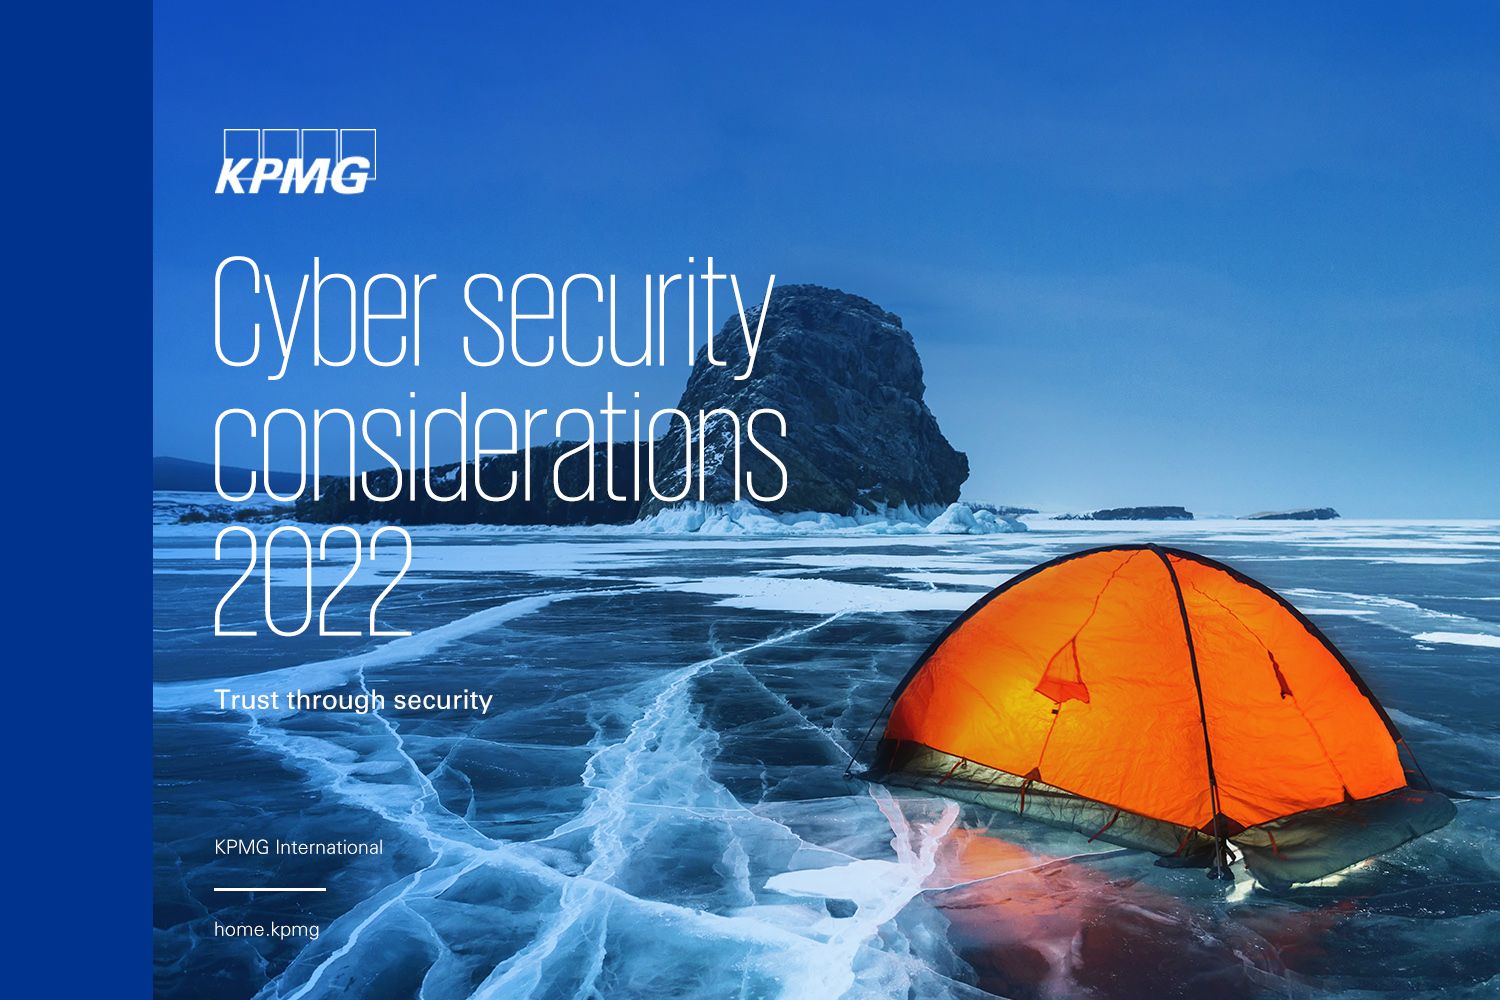 Cyber security considerations 2022- PDF thumbnail